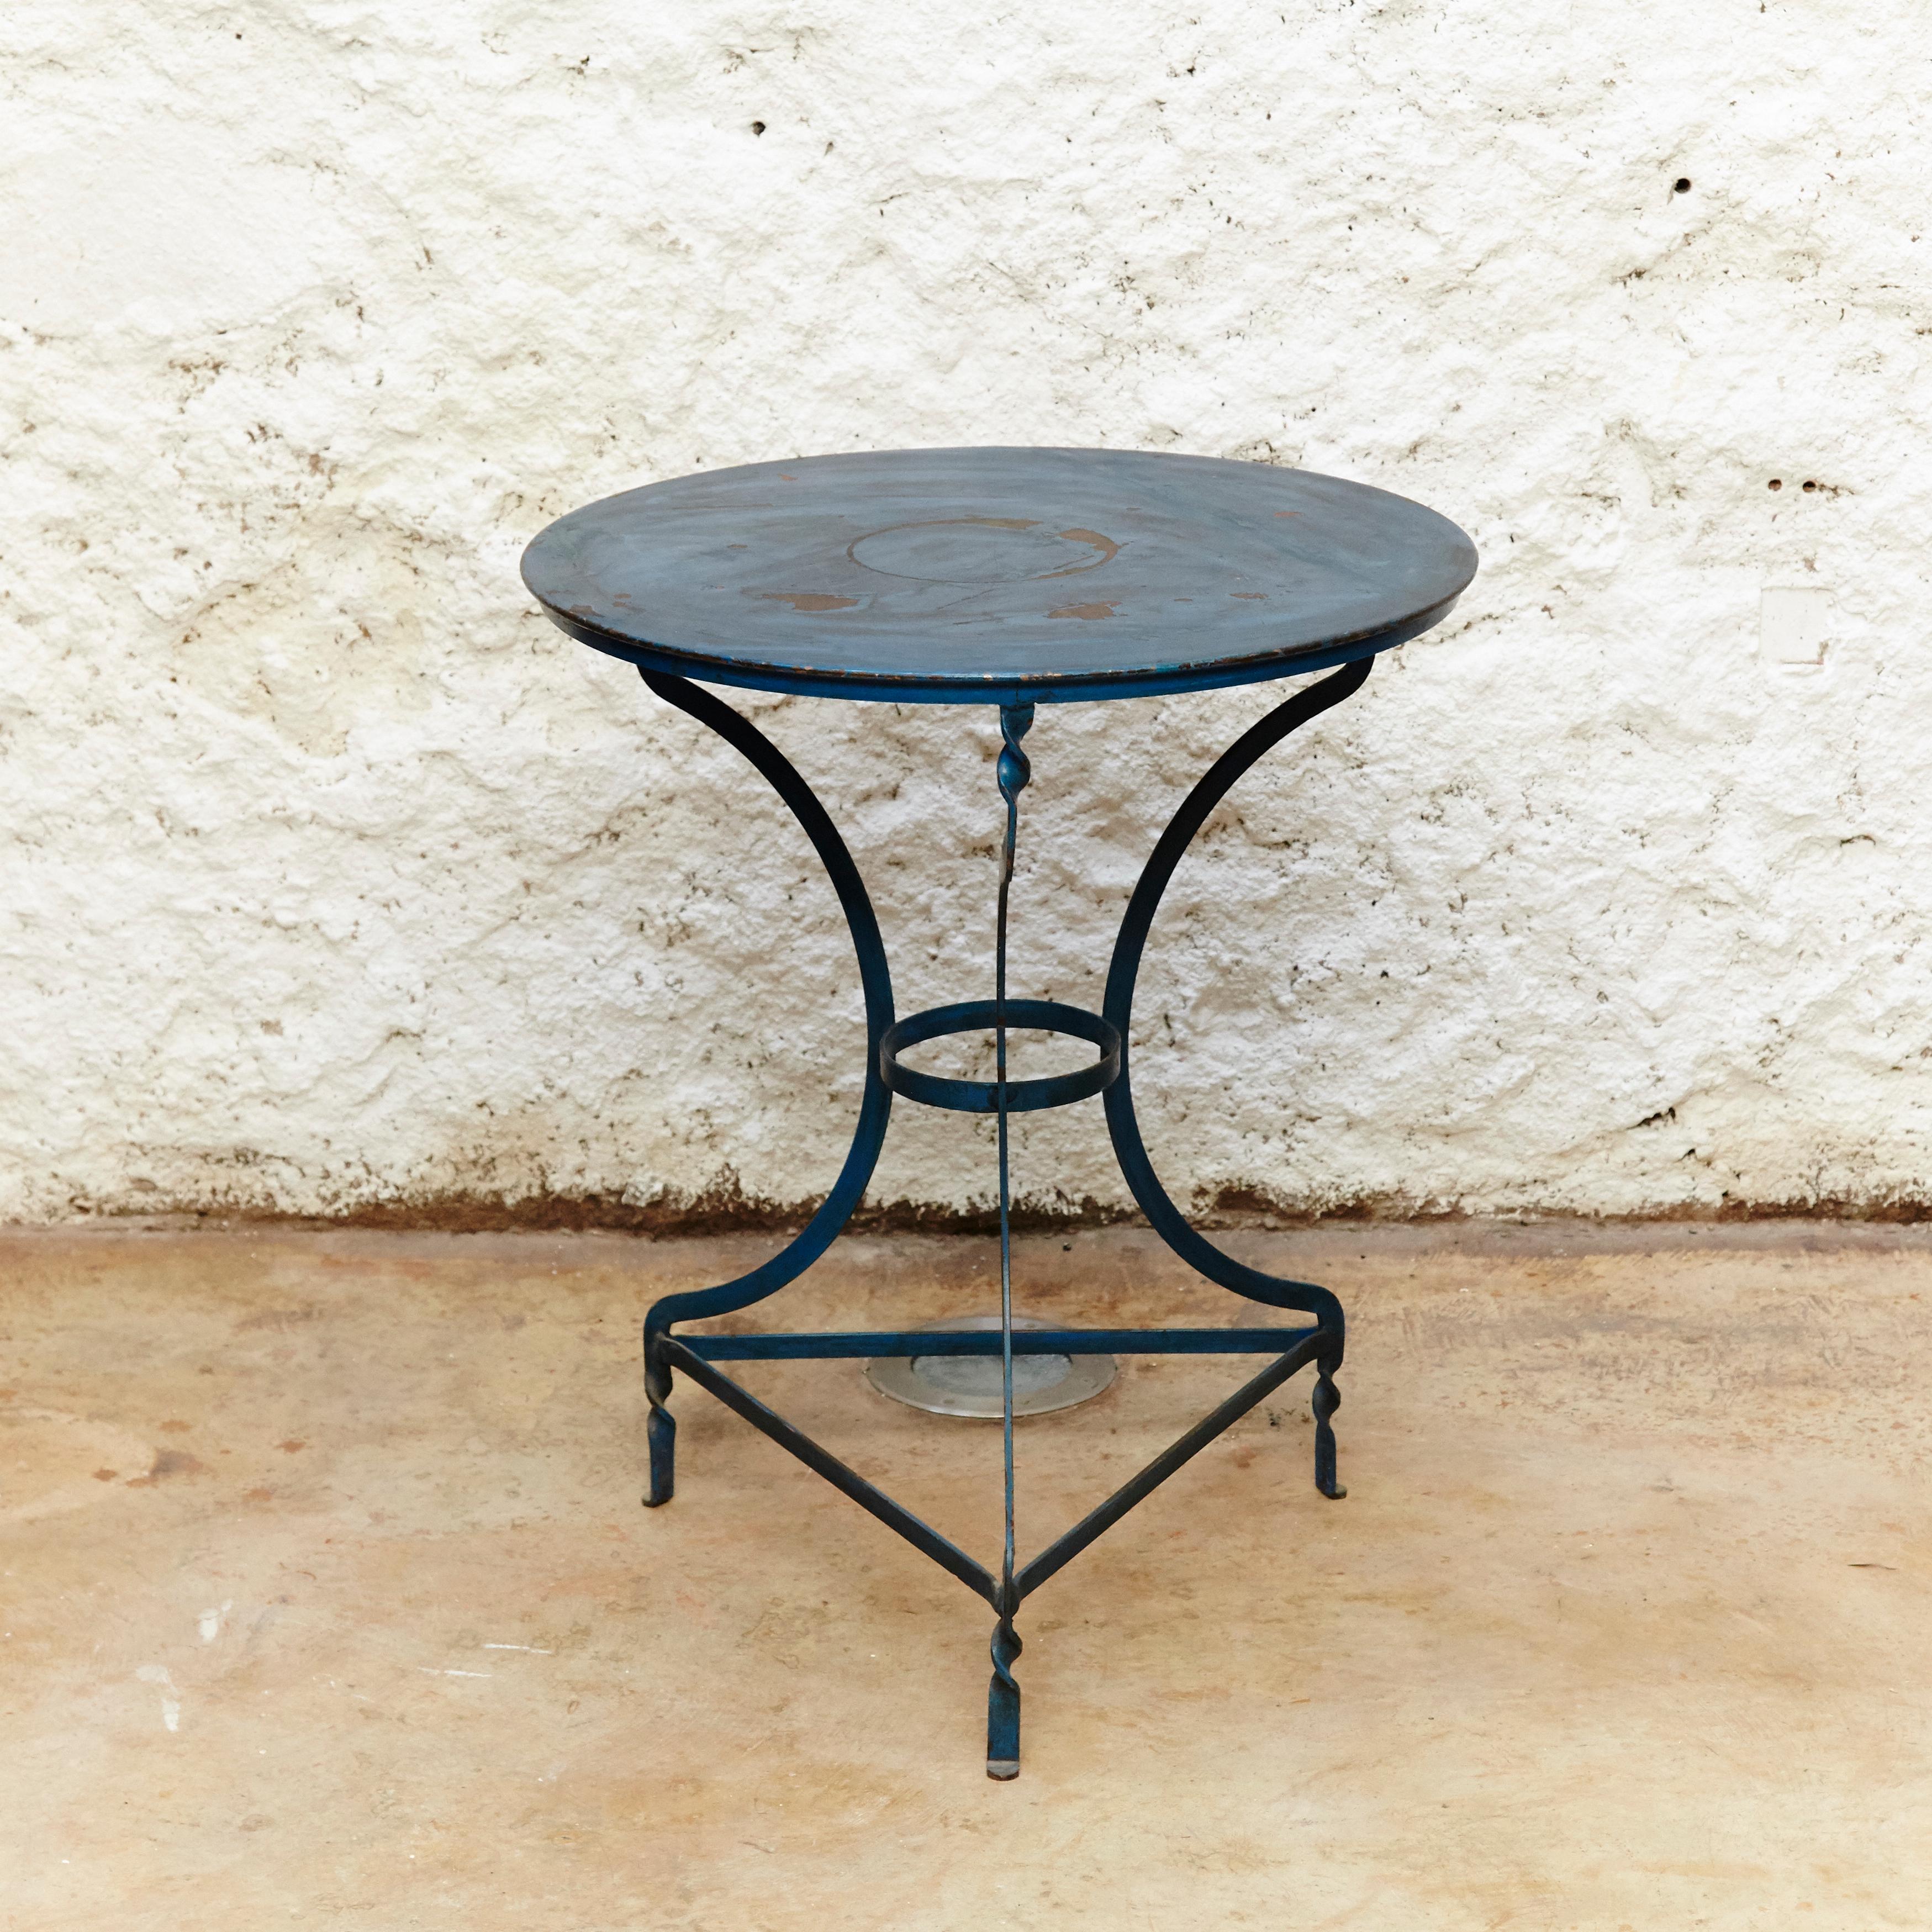 Bistrot table,
Manufactured in France, circa 1930.
Lacquered blue metal.

In original condition with wear consistent of age and use, preserving a beautiful patina. With some traces of rust as shown on the photos.